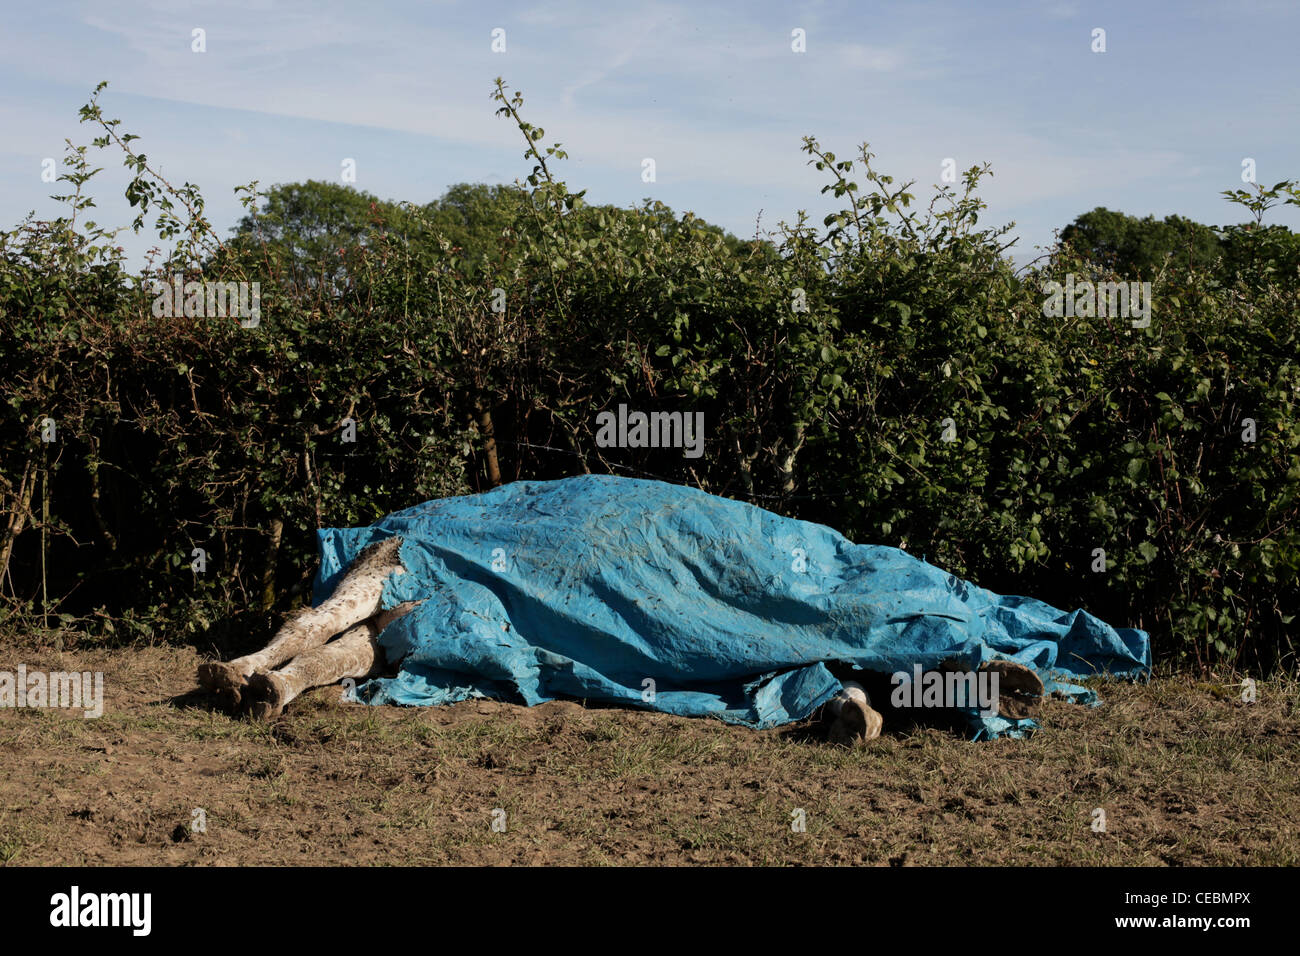 A dead cow lies in a field in Crowborough, Sussex, UK covered in blue sheeting. Stock Photo